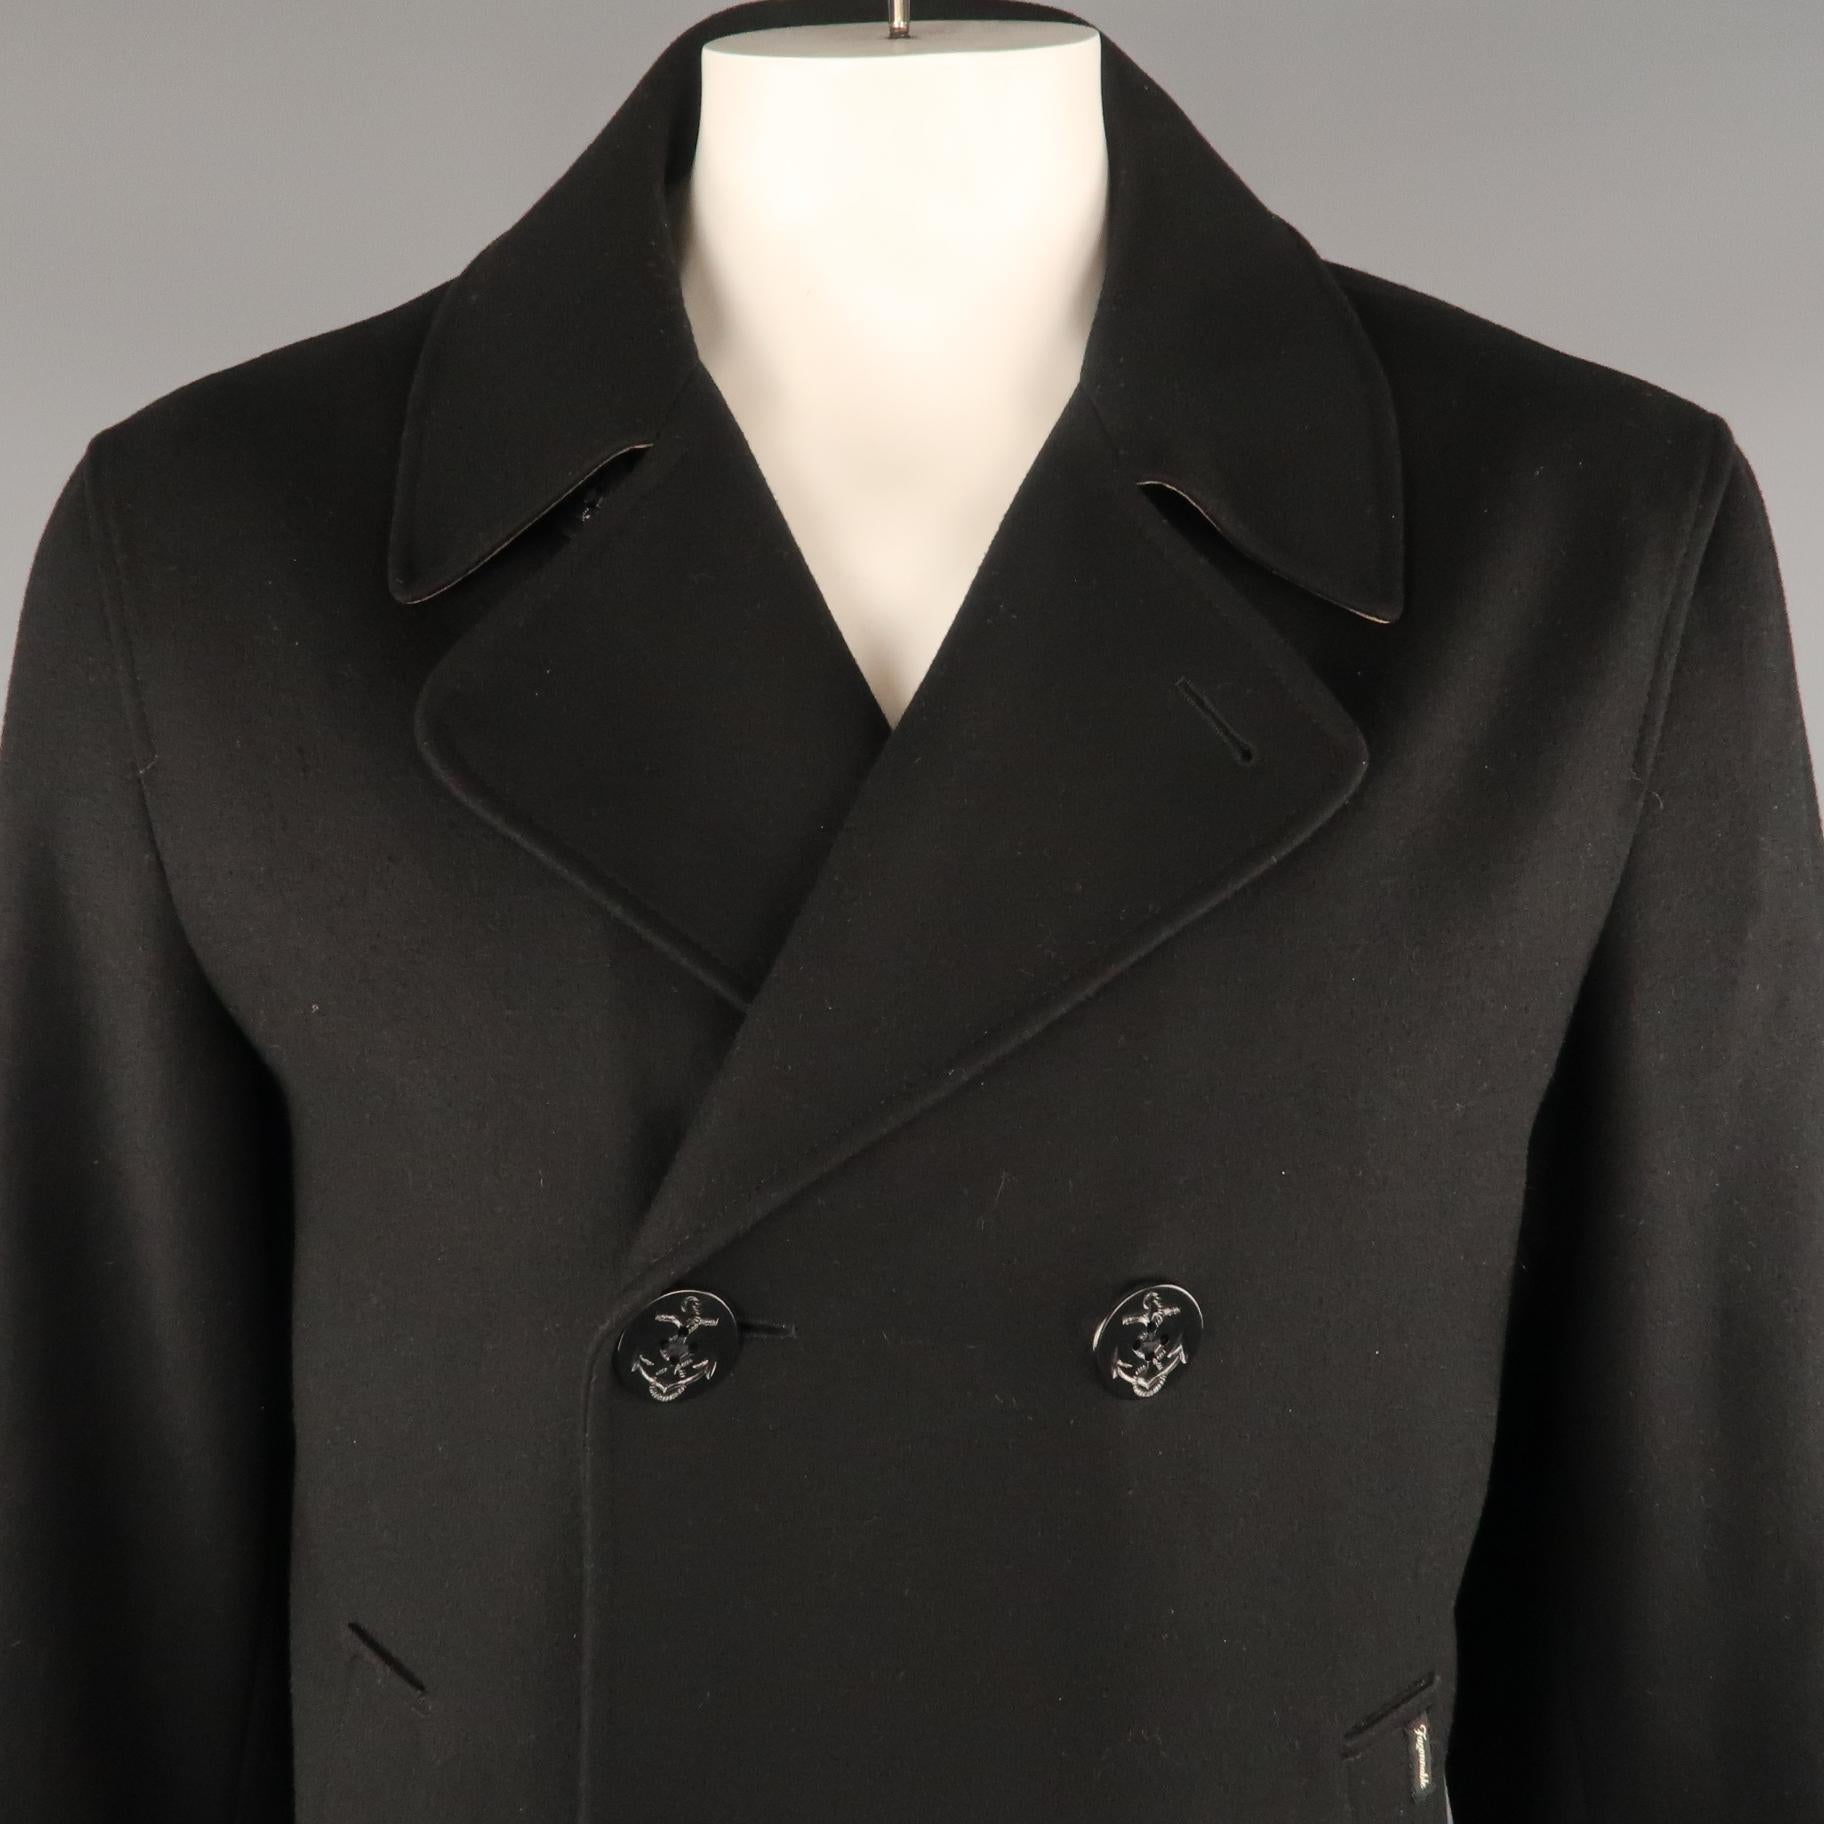 FACONNABLE Peacoat comes in a black tone in a solid wool material, with a notch lapel, double breasted, slit pockets, a quilted lining  and a single vent at back.
 
Excellent Pre-Owned Condition.
Marked: L
 
Measurements:
 
Shoulder: 19 in.
Chest: